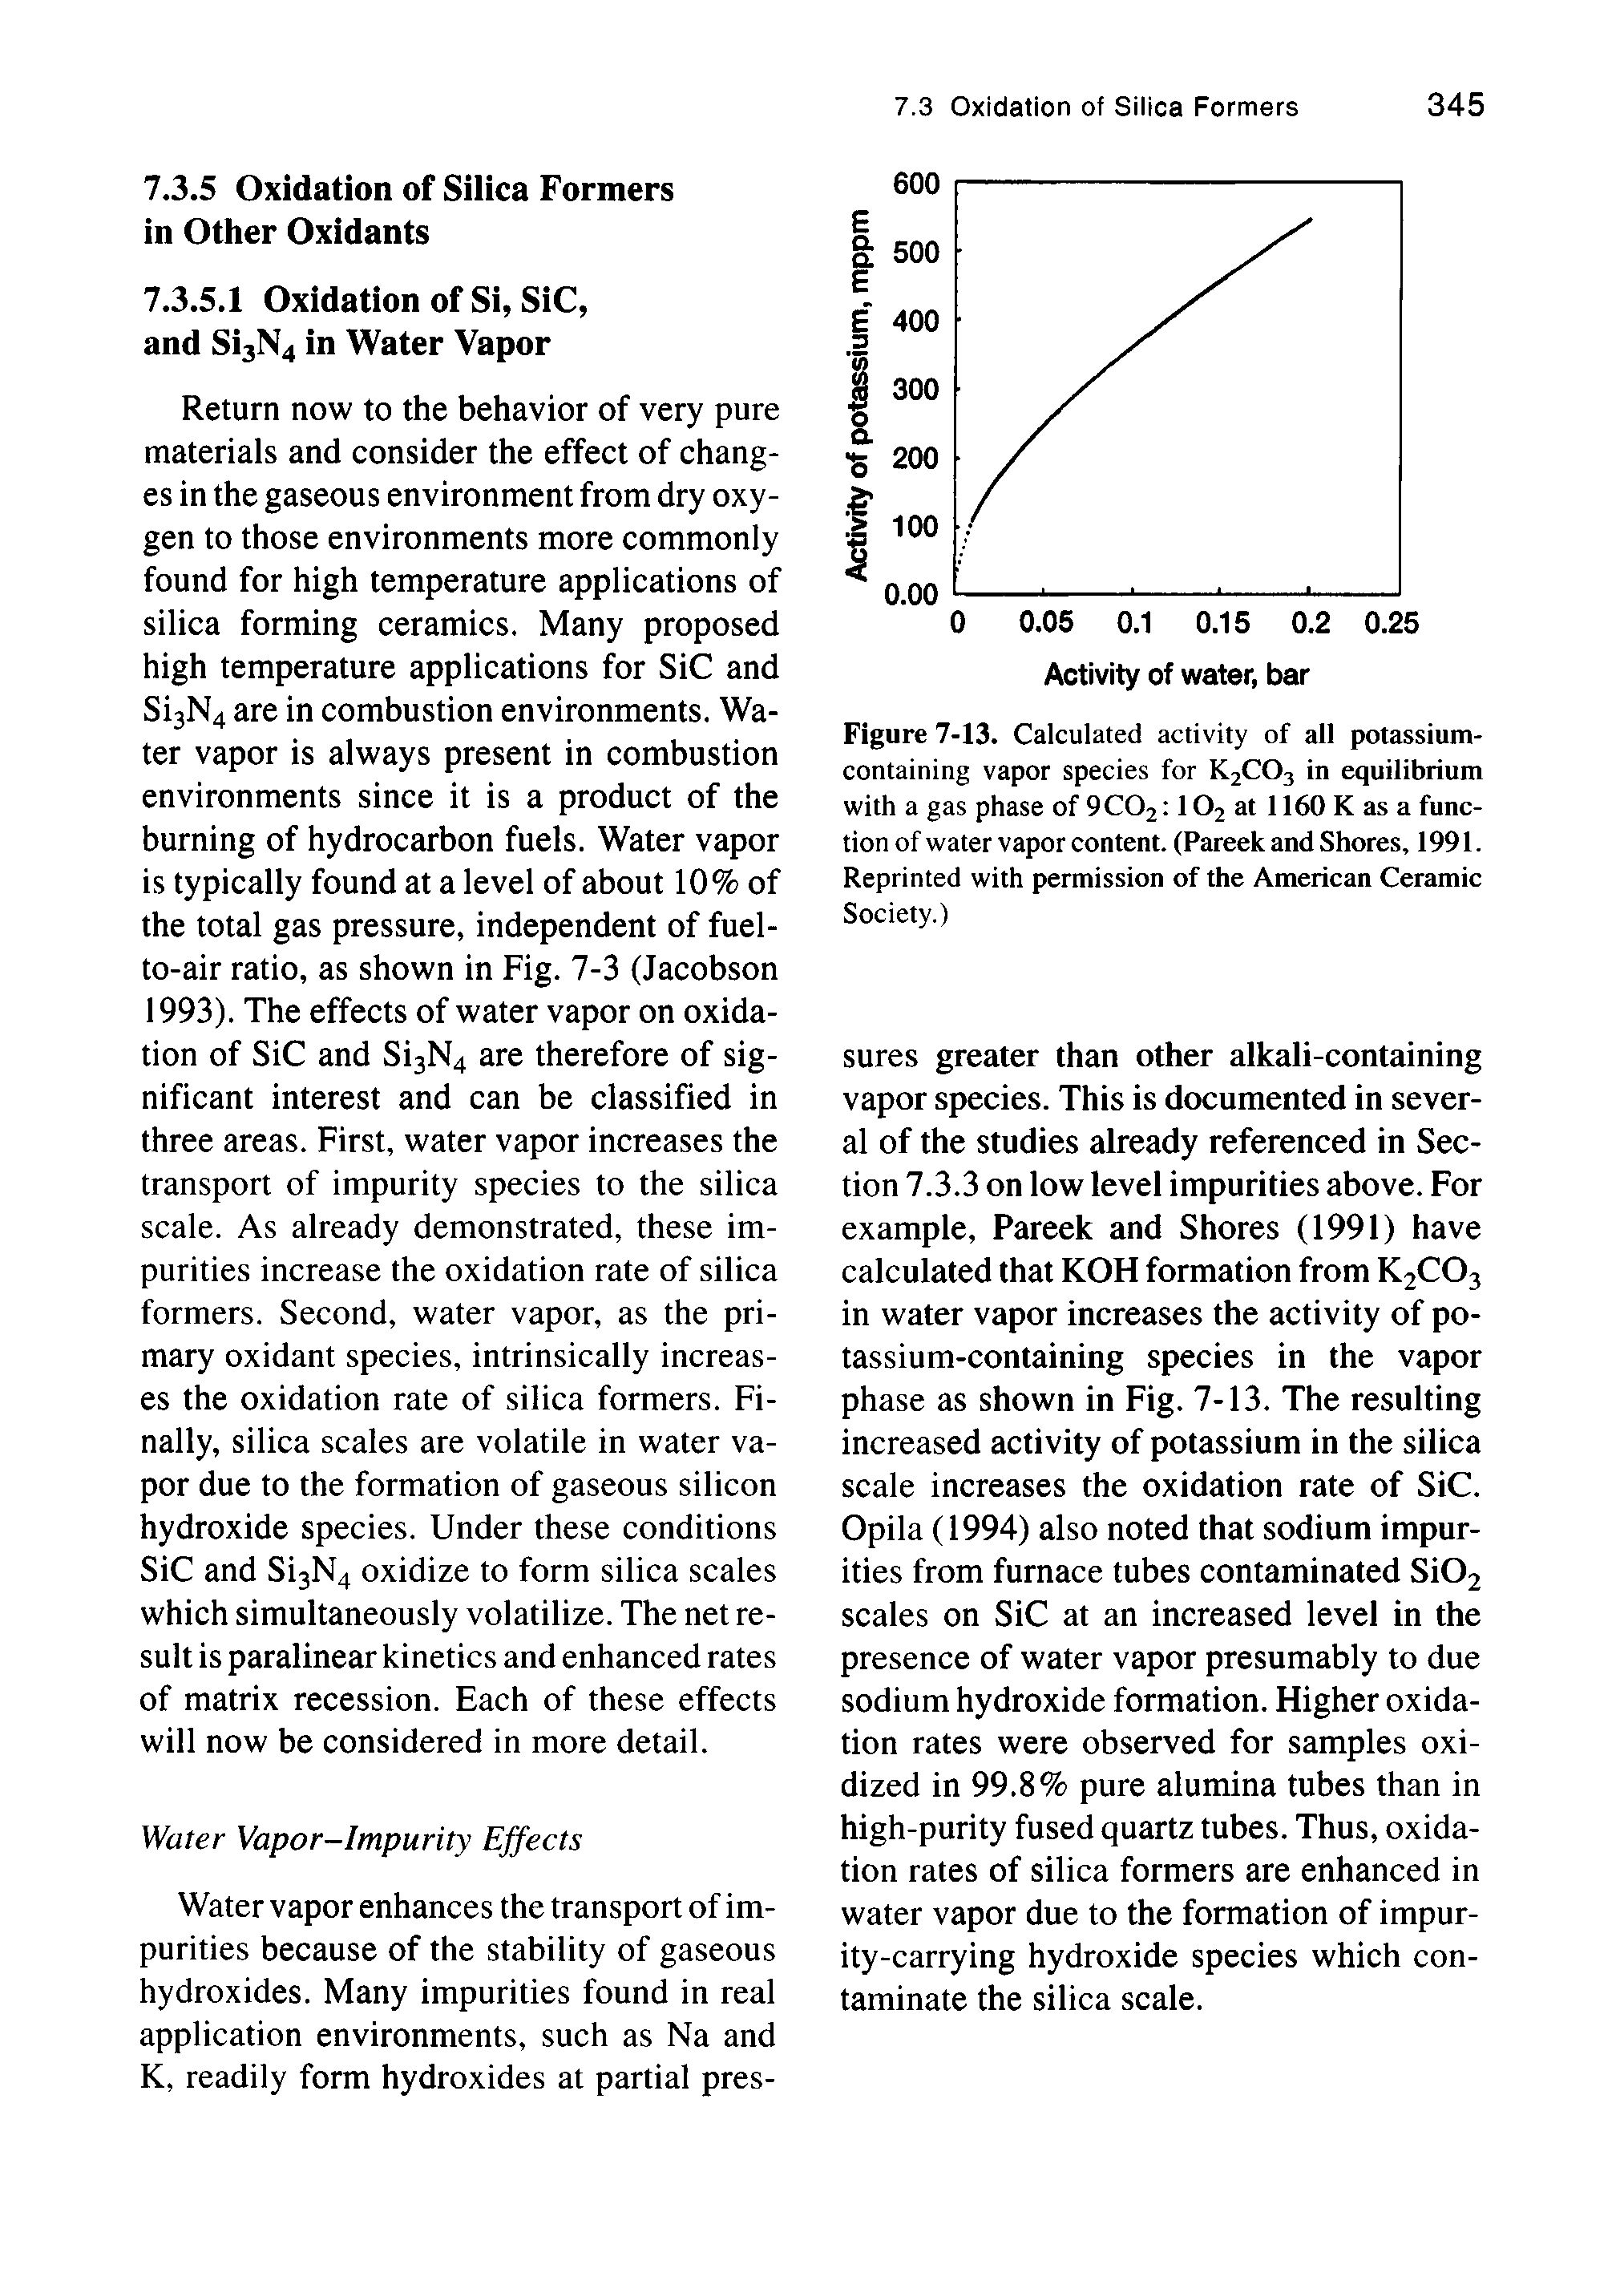 Figure 7-13. Calculated activity of all potassium-containing vapor species for K2CO3 in equilibrium with a gas phase of 9CO2 102 at 1160 K as a function of water vapor content. (Pareek and Shores, 1991. Reprinted with permission of the American Ceramic Society.)...